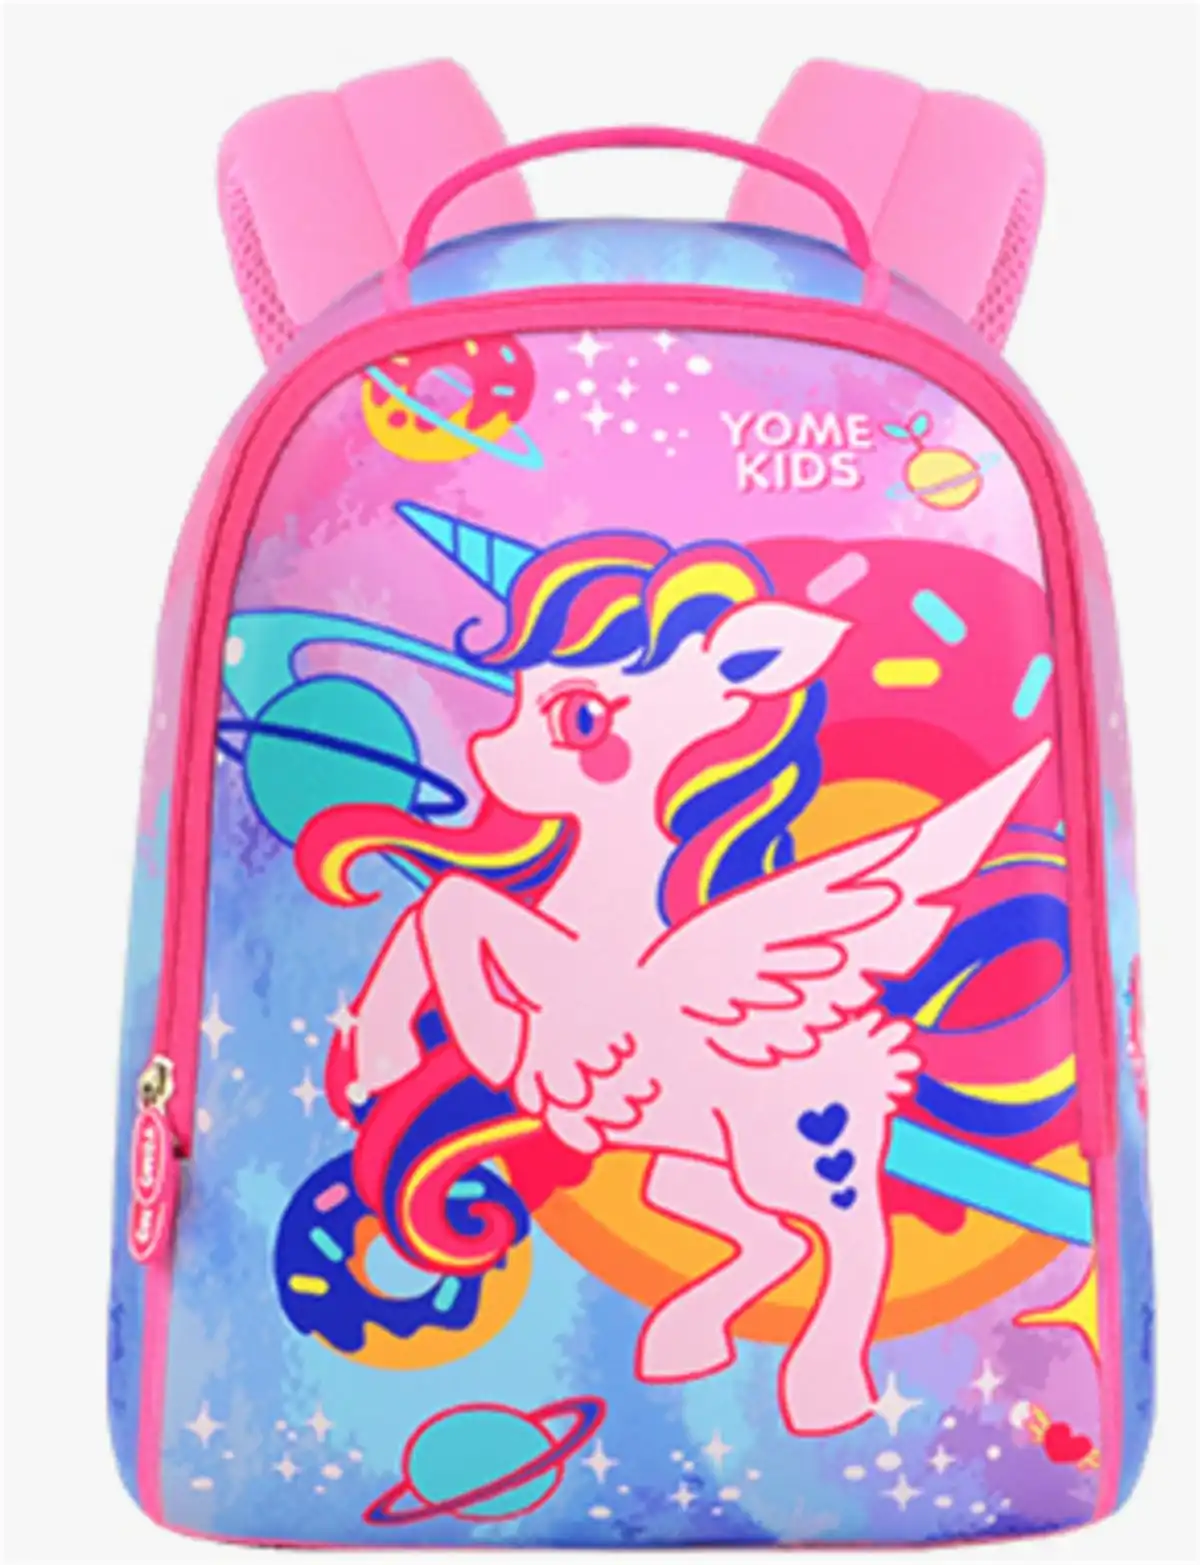 Yome Kids School Backpack With Back Support and Airflow Systerm For kindergarten-Year 2 Students YC19 Pink